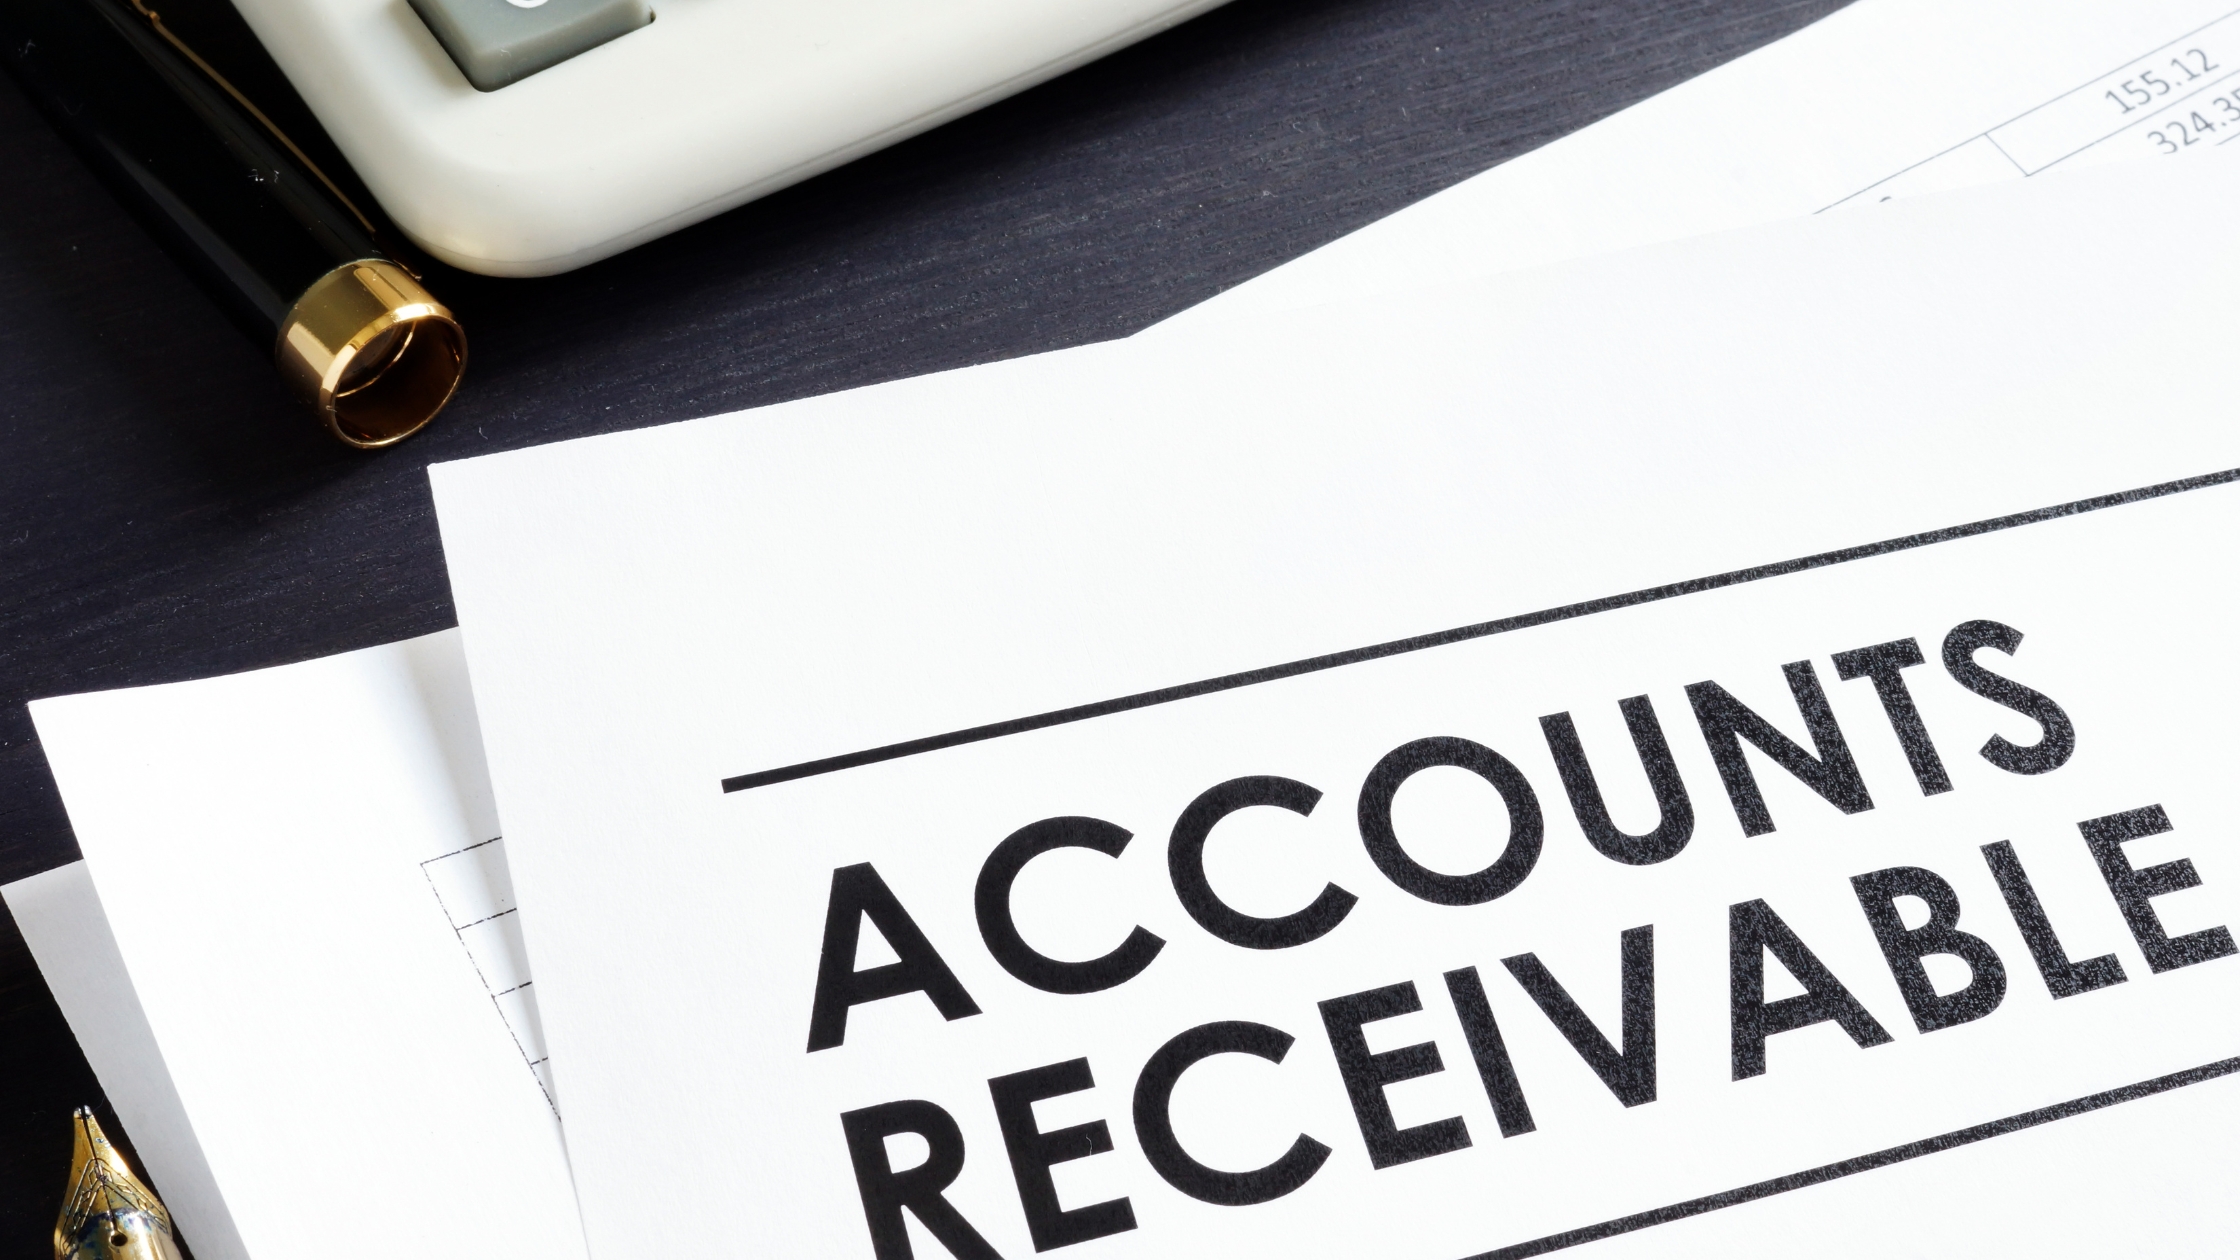 Monthly Accounts Receivables: Documents and calculator on desk, focusing on "Accounts Receivable" text.